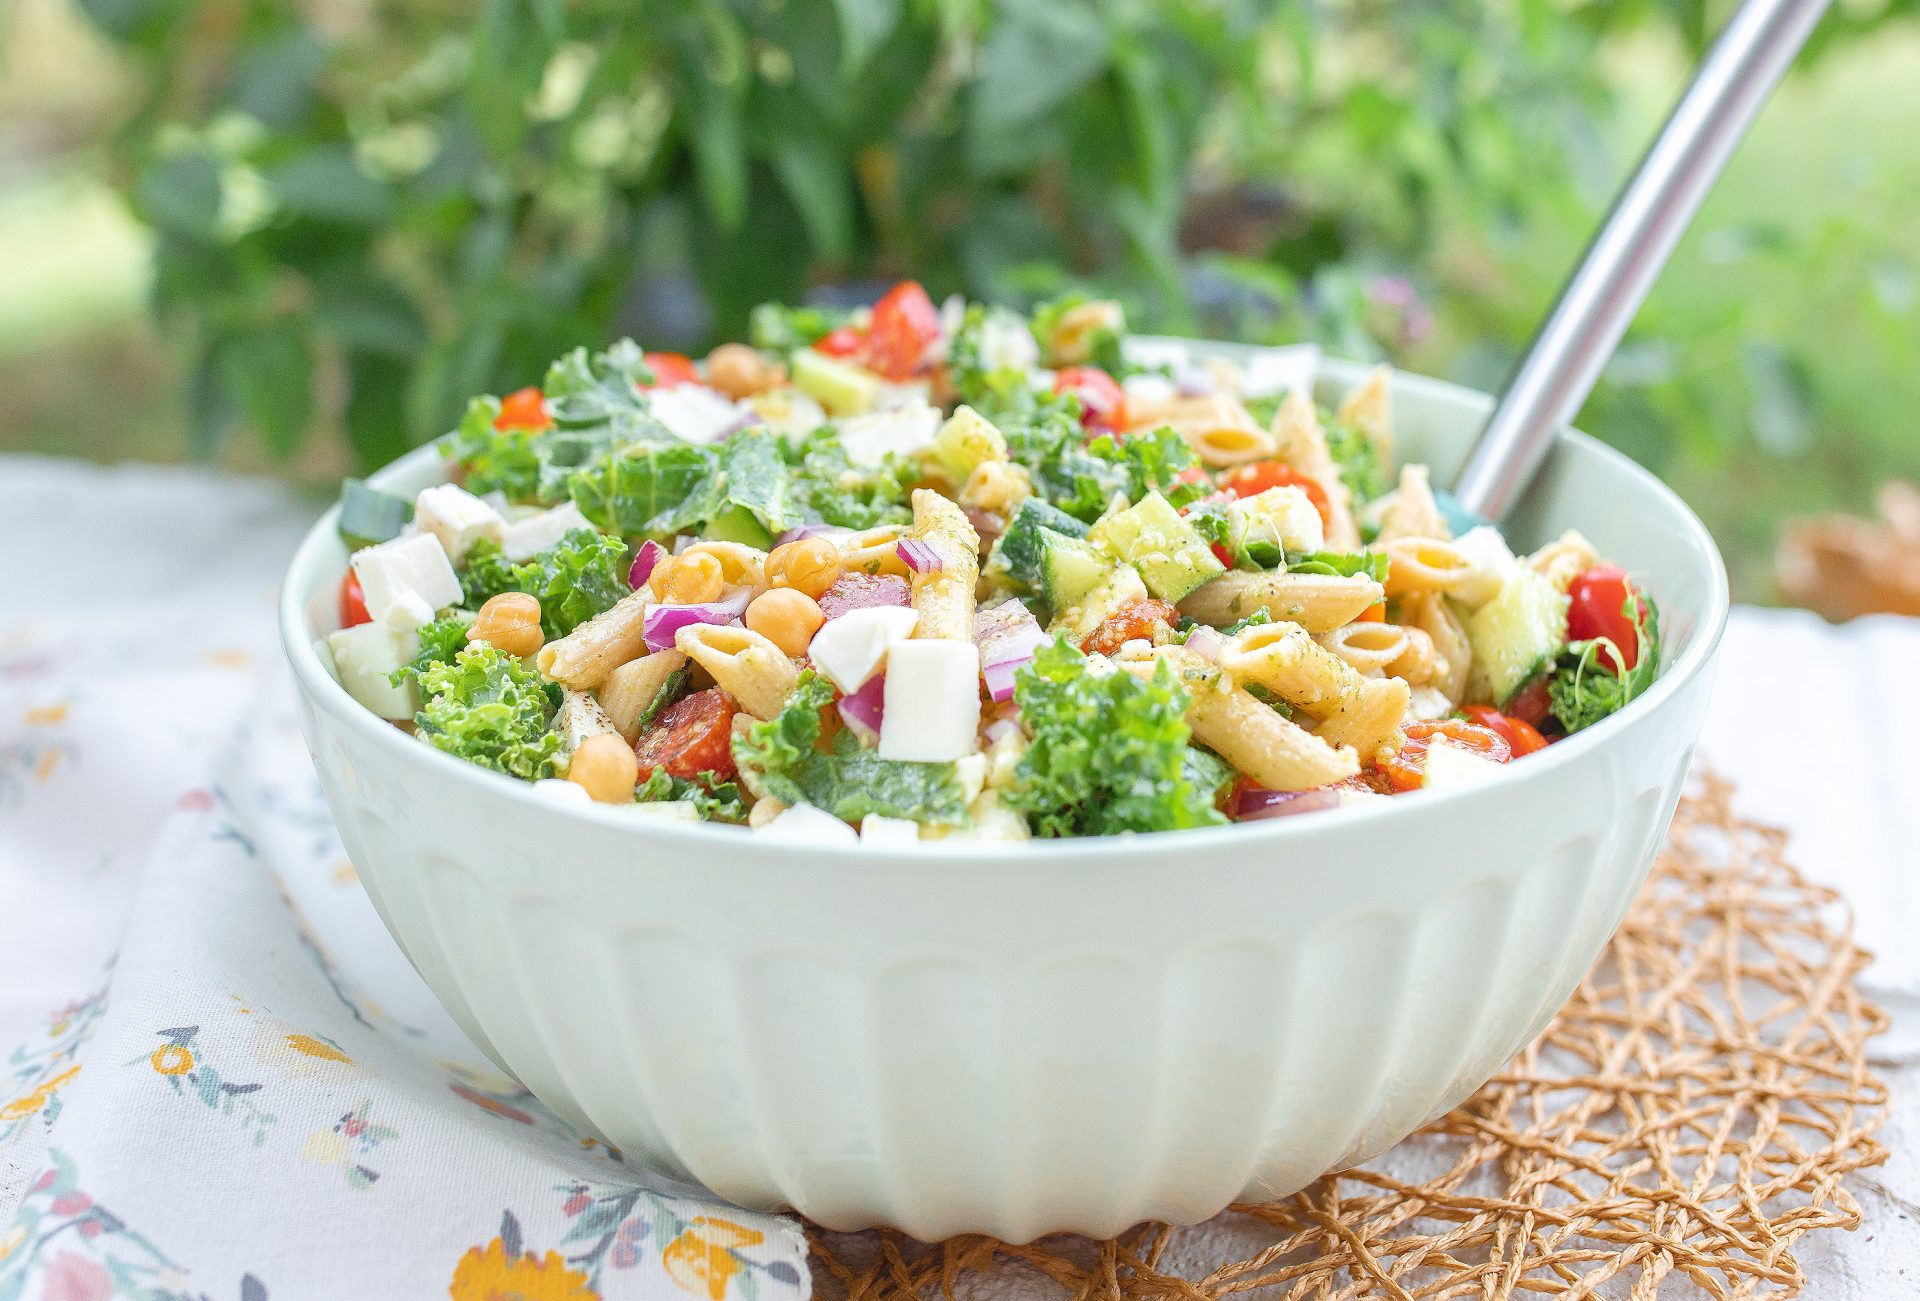 pesto pasta salad, chickpea, lunch, meal prep, gluten-free, kale salad, healthy eating, party foods, delicious colorful meals, lunch, dinner, side salad, pasta salad, pesto, basil, mozzarella, no bake